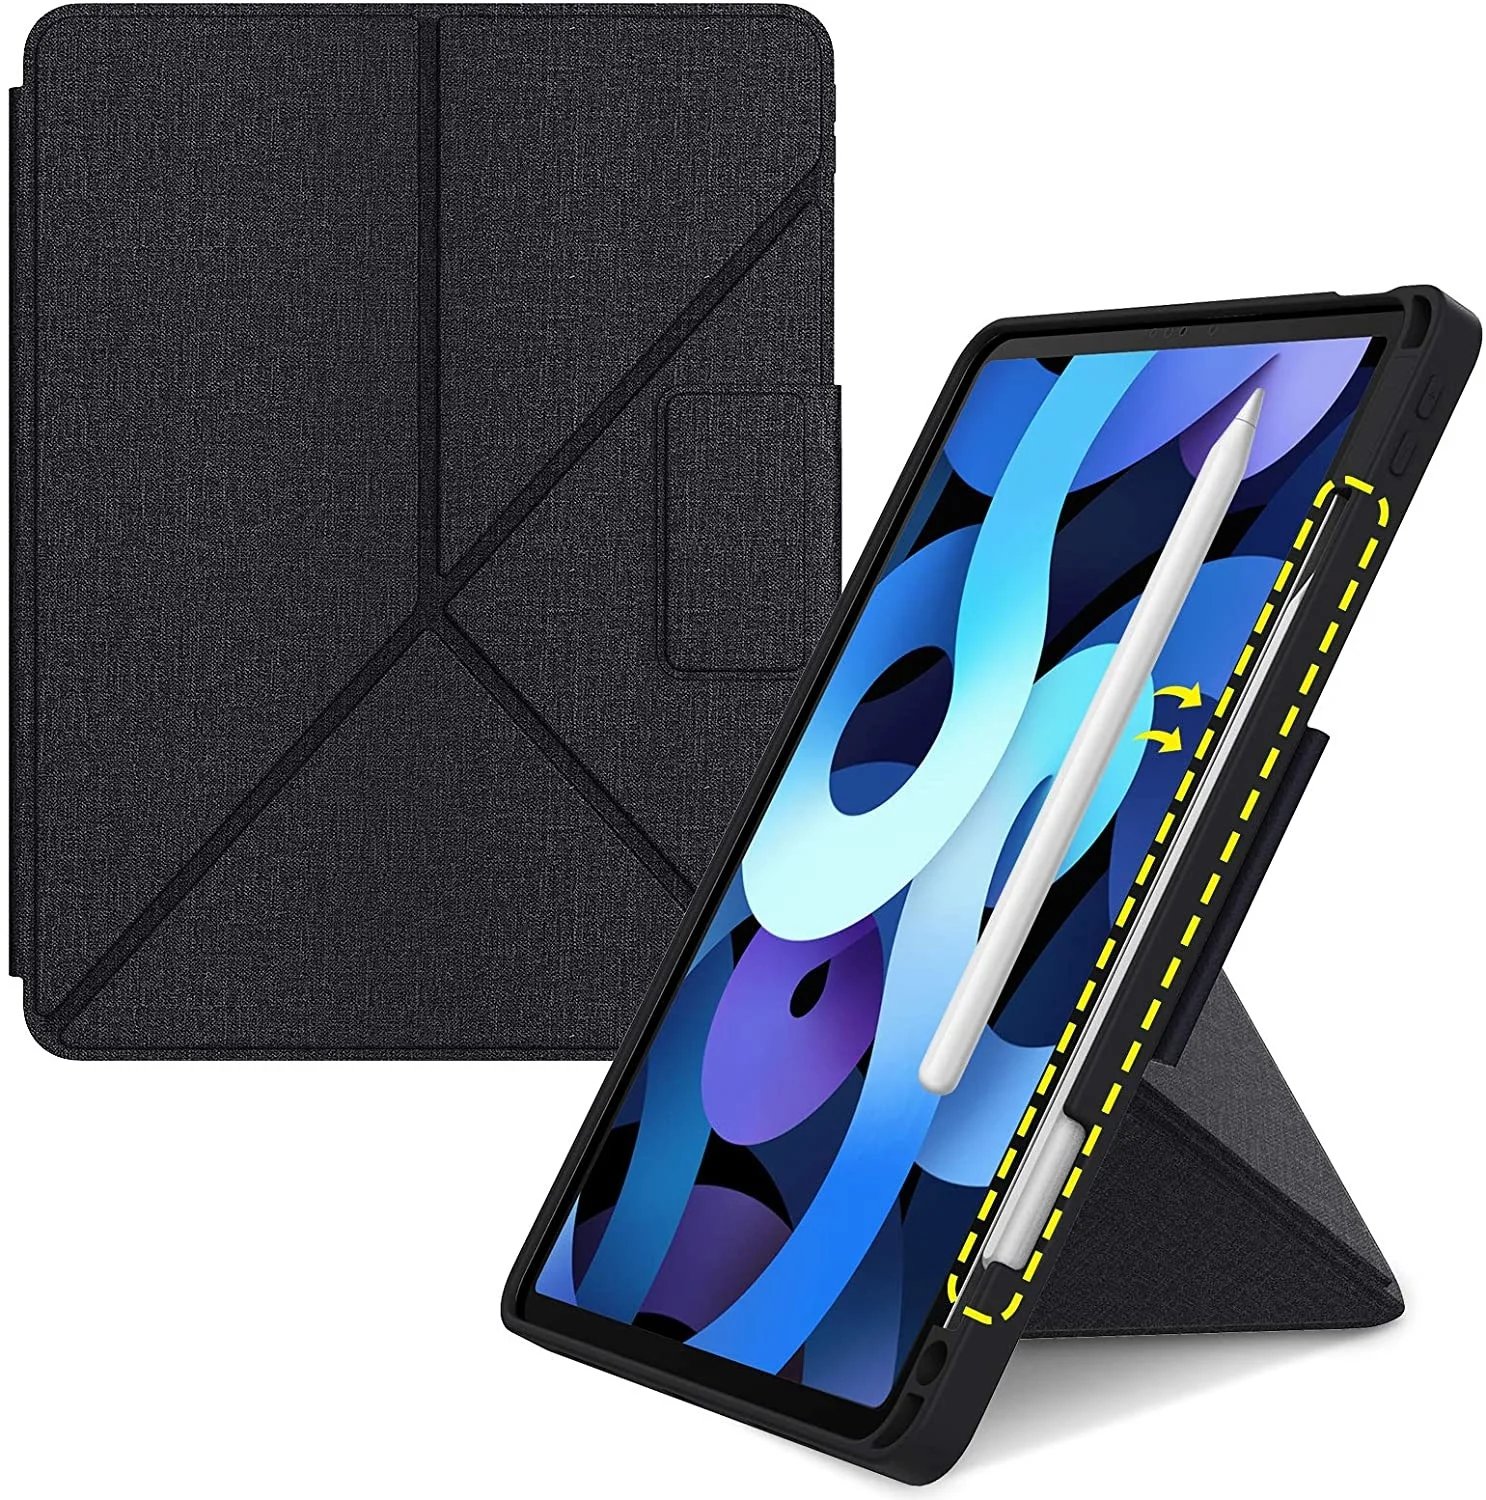 

Case for iPad Air 4 10.9" 2020 iPad Air 4th /2020 iPad Pro 11"/2018 iPad Pro 11" Case with Pencil Holder Origami Slim Shell